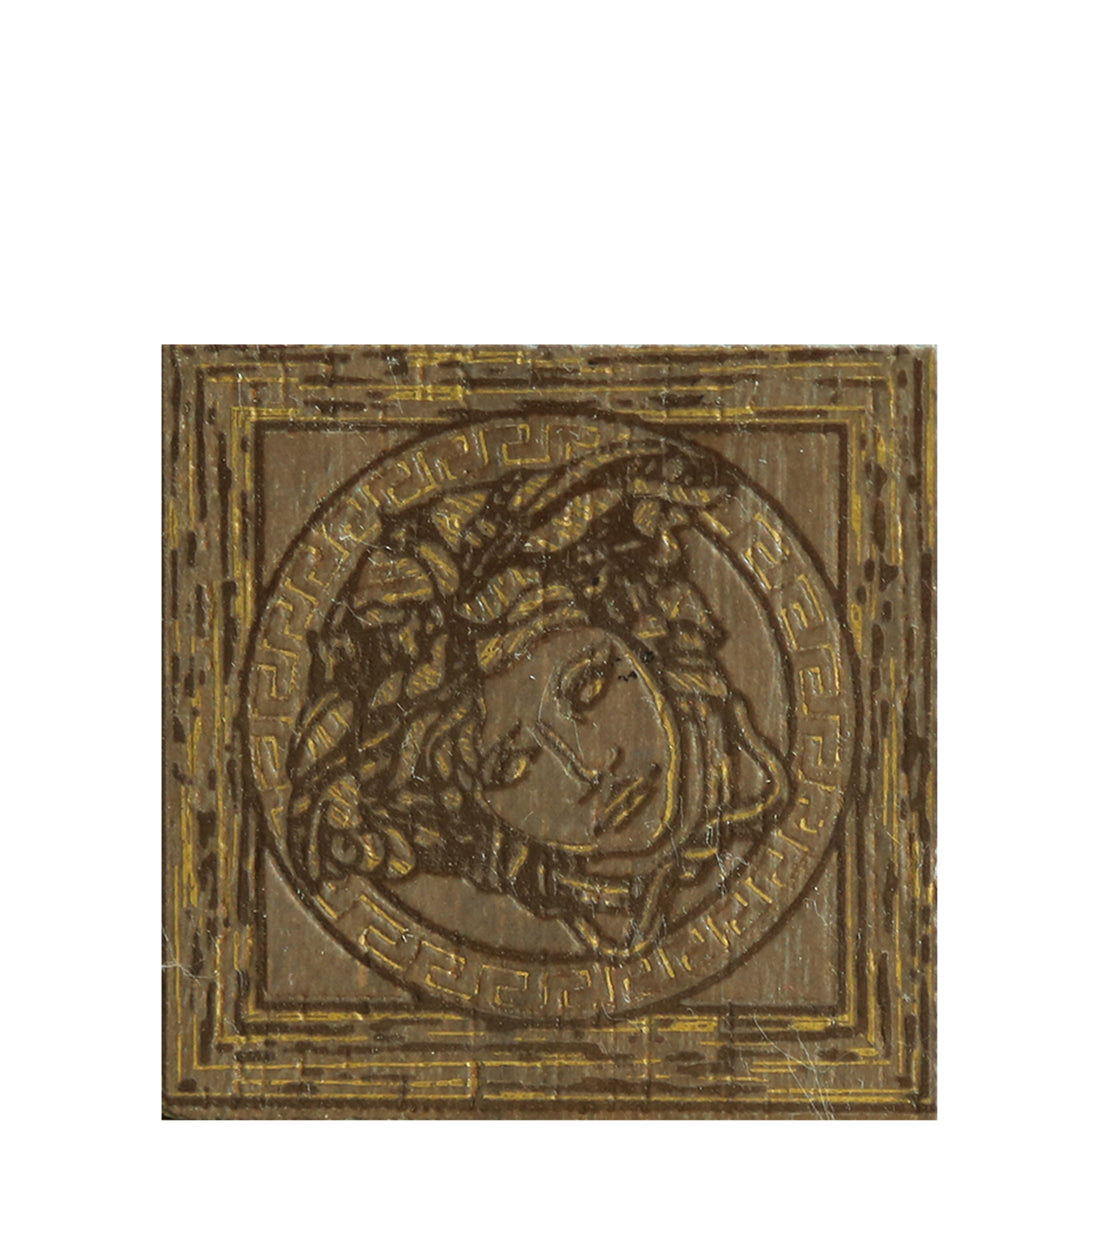 Versace Tiles- Tozz Med Oro Moka Elite (120391) -This tile talks about nothing, but Pure Beauty given the Medusa Logo so distinctly imprinted upon it.